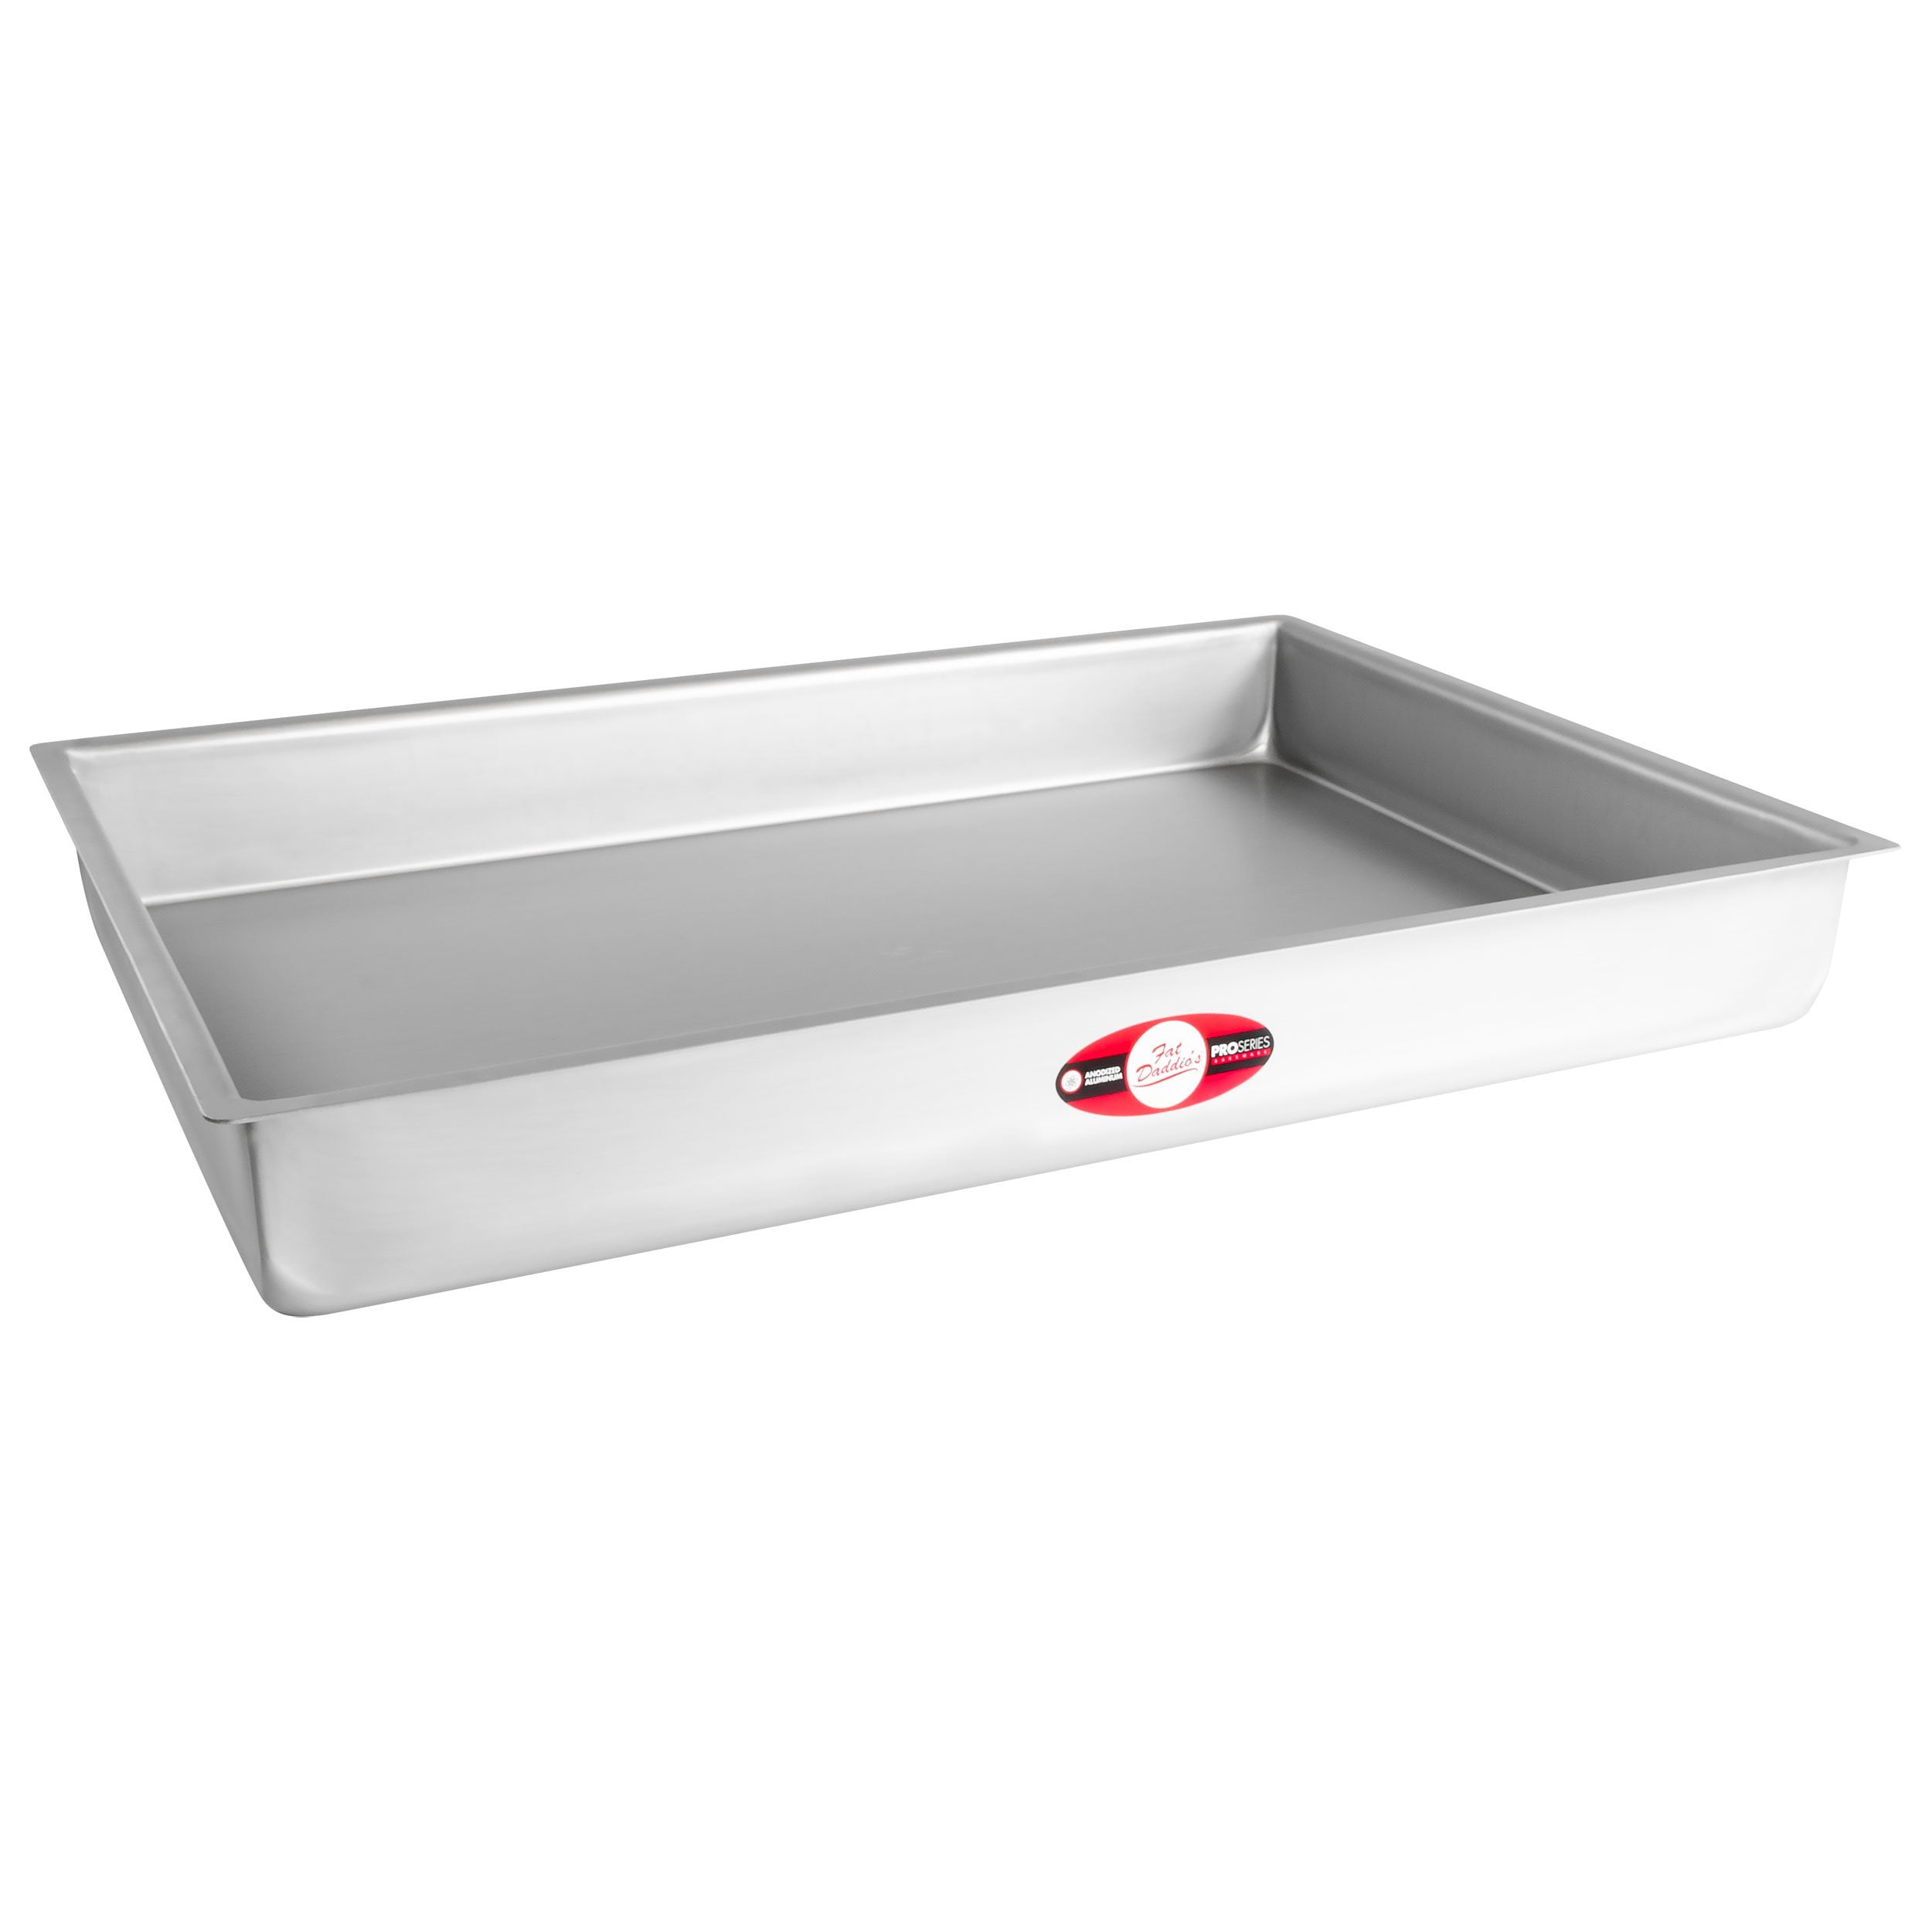 Large Oven Tray – Haden